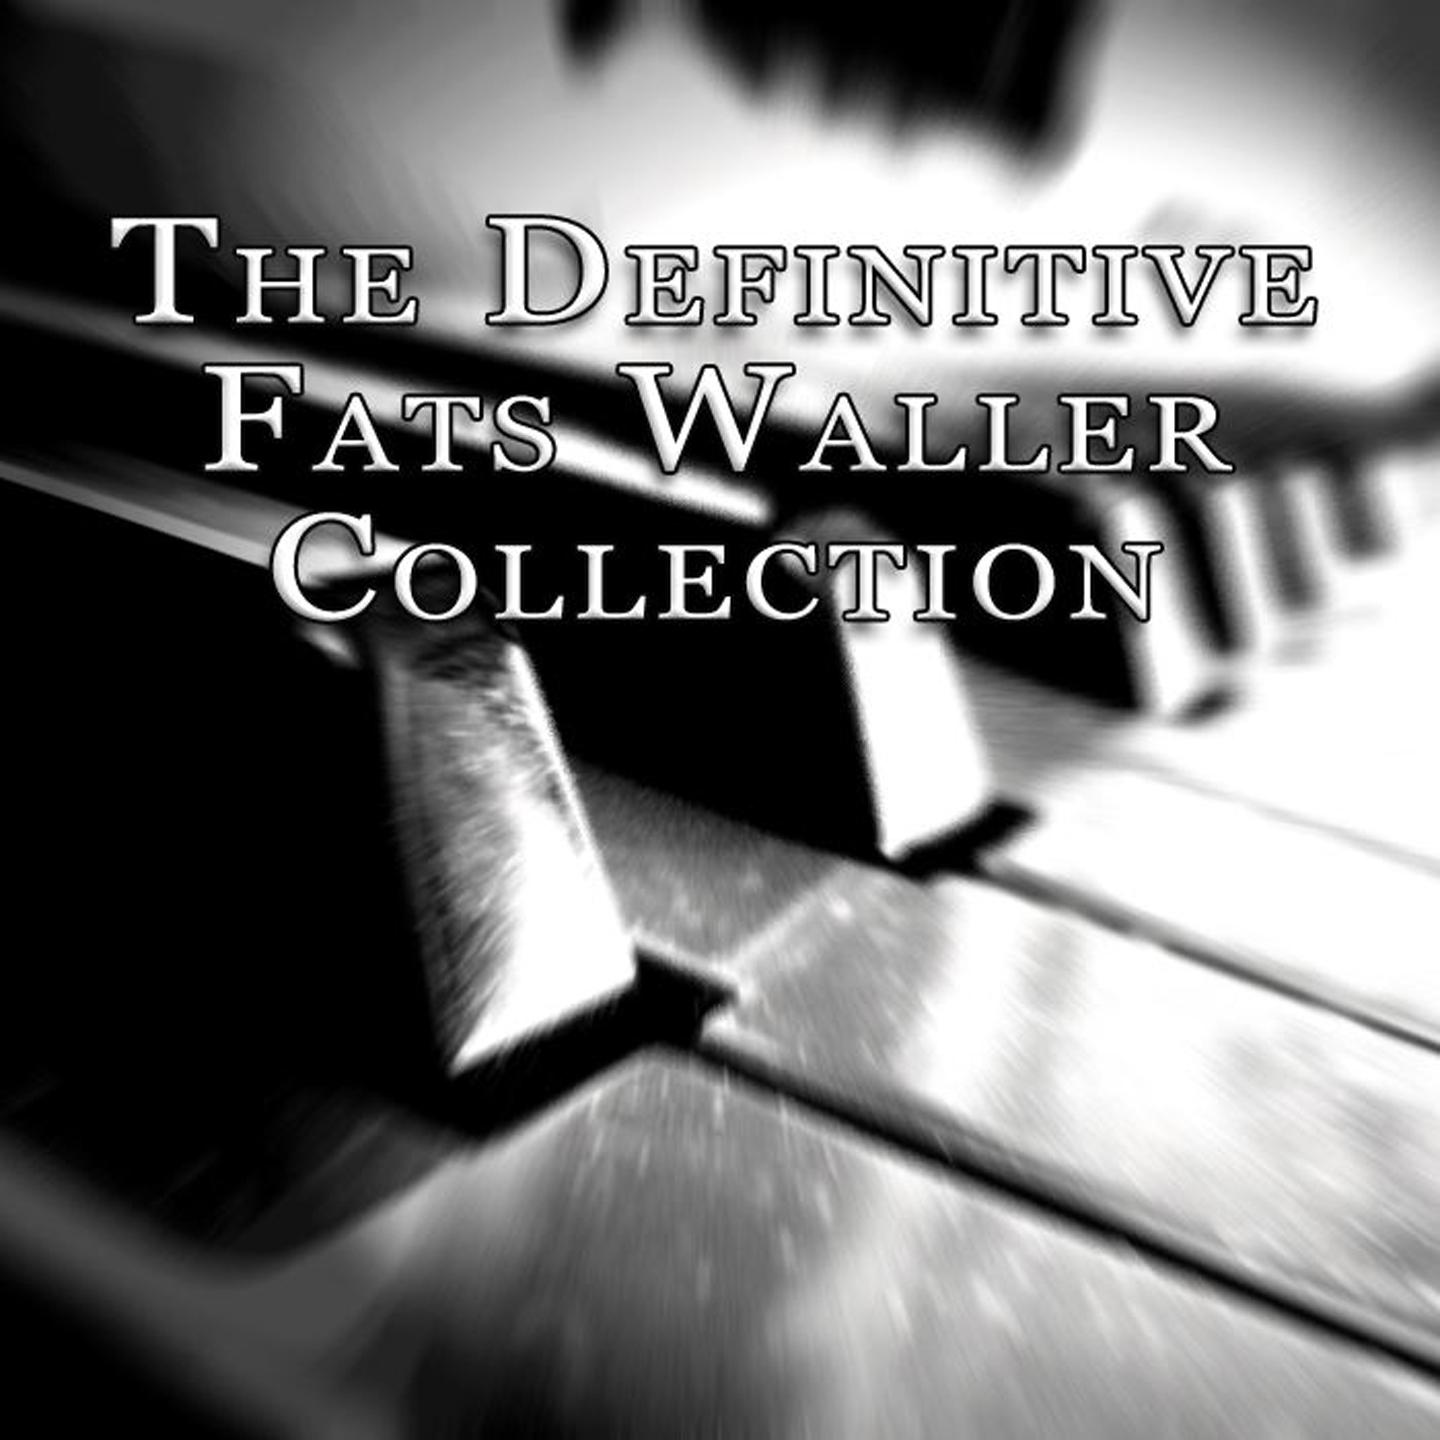 The Definitive Collection of Fats Waller